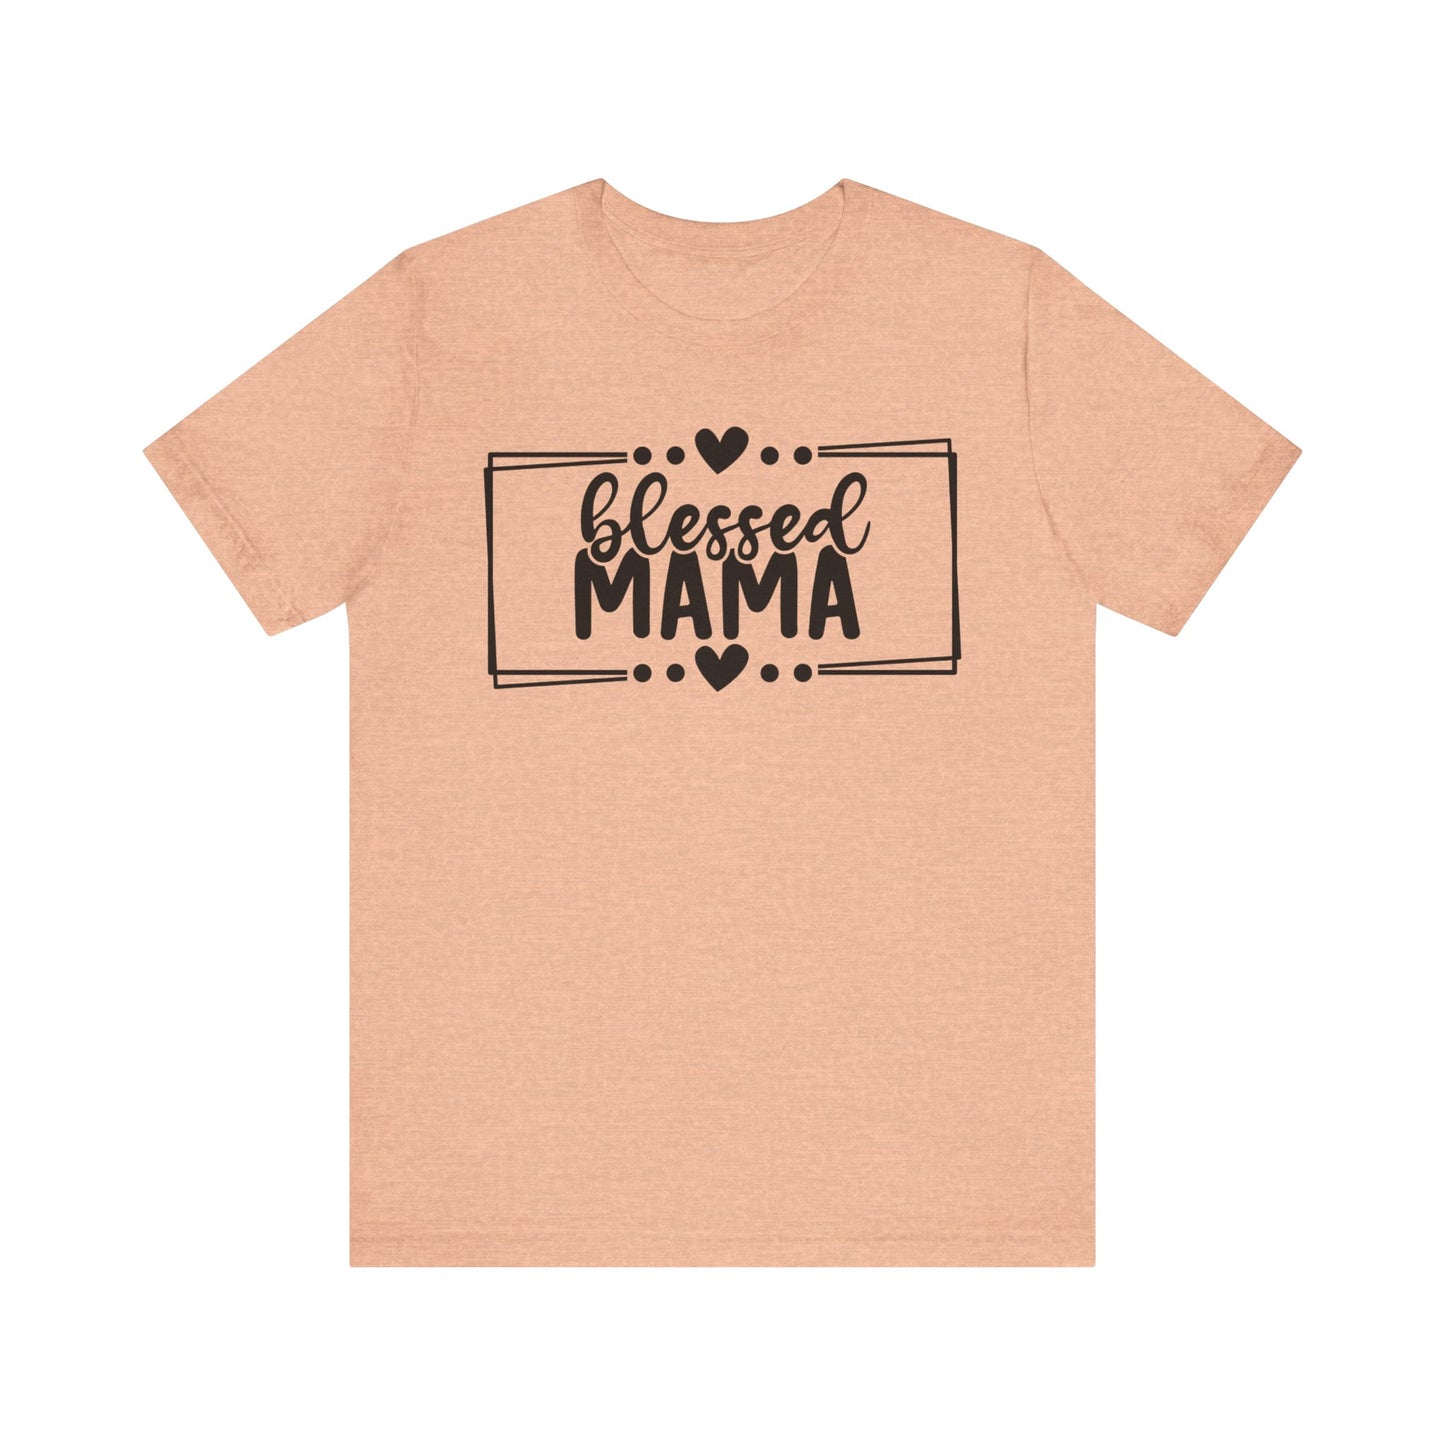 Blessed Mama Heart Shirt, Mother's Day Gift, Mom Tee, Mama Tshirt (Mom-05)